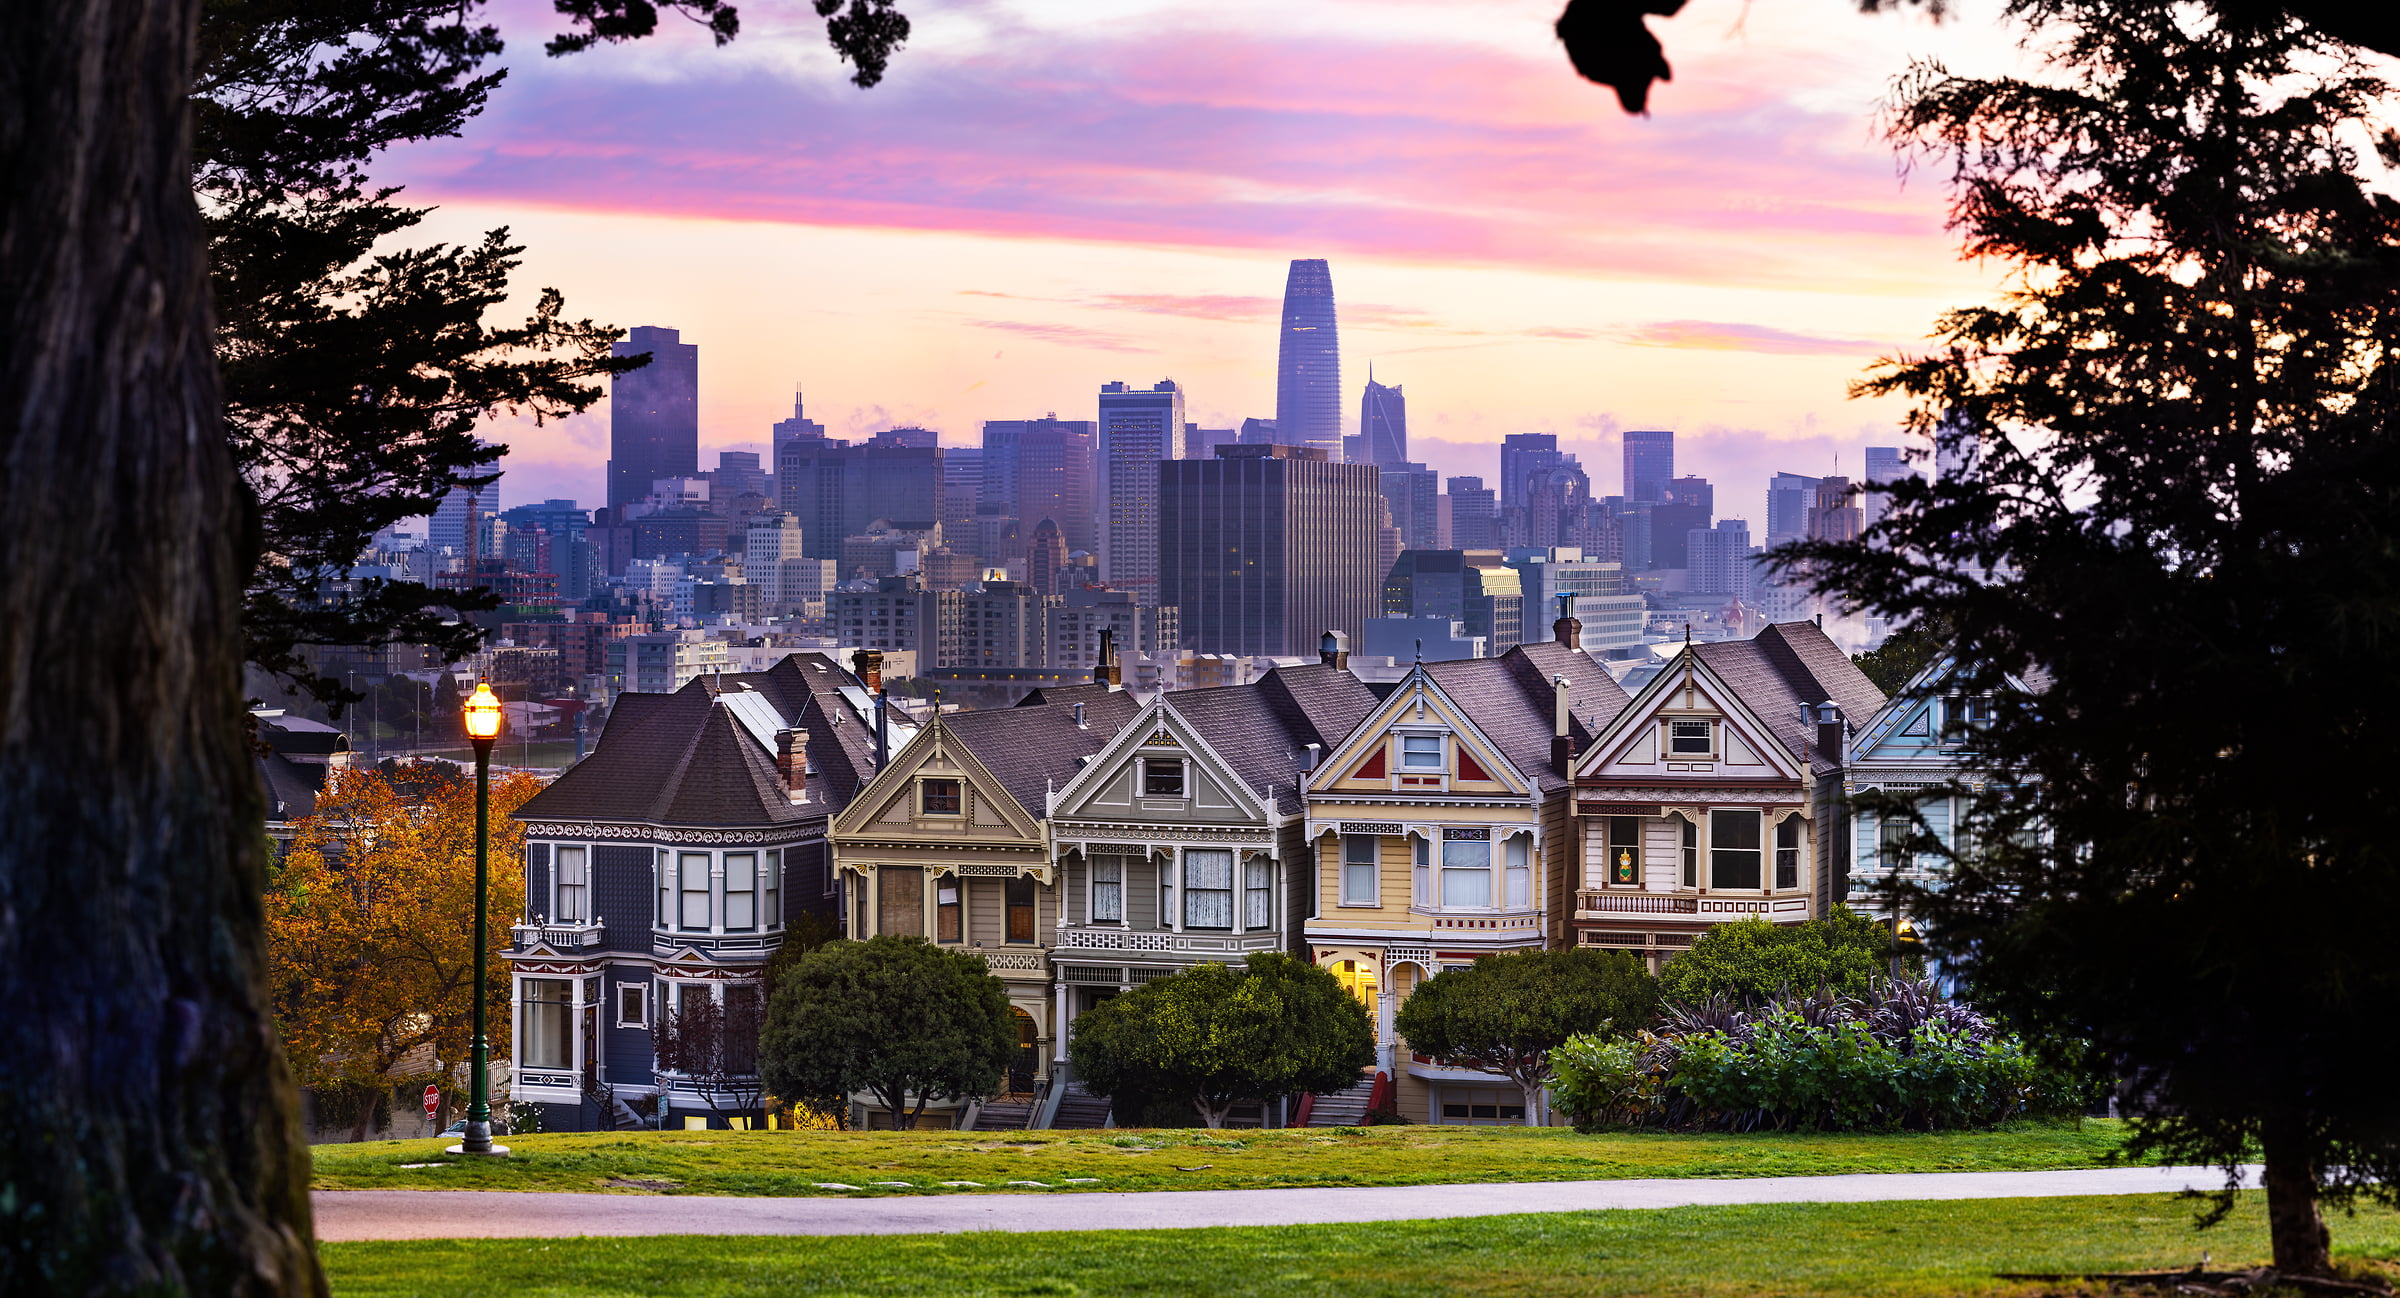 355 megapixels! A very high resolution, large-format VAST photo print of the Painted Ladies houses in San Francisco at sunset; photograph created by Nicholas Gonzales in Alamo Square, San Francisco, California.